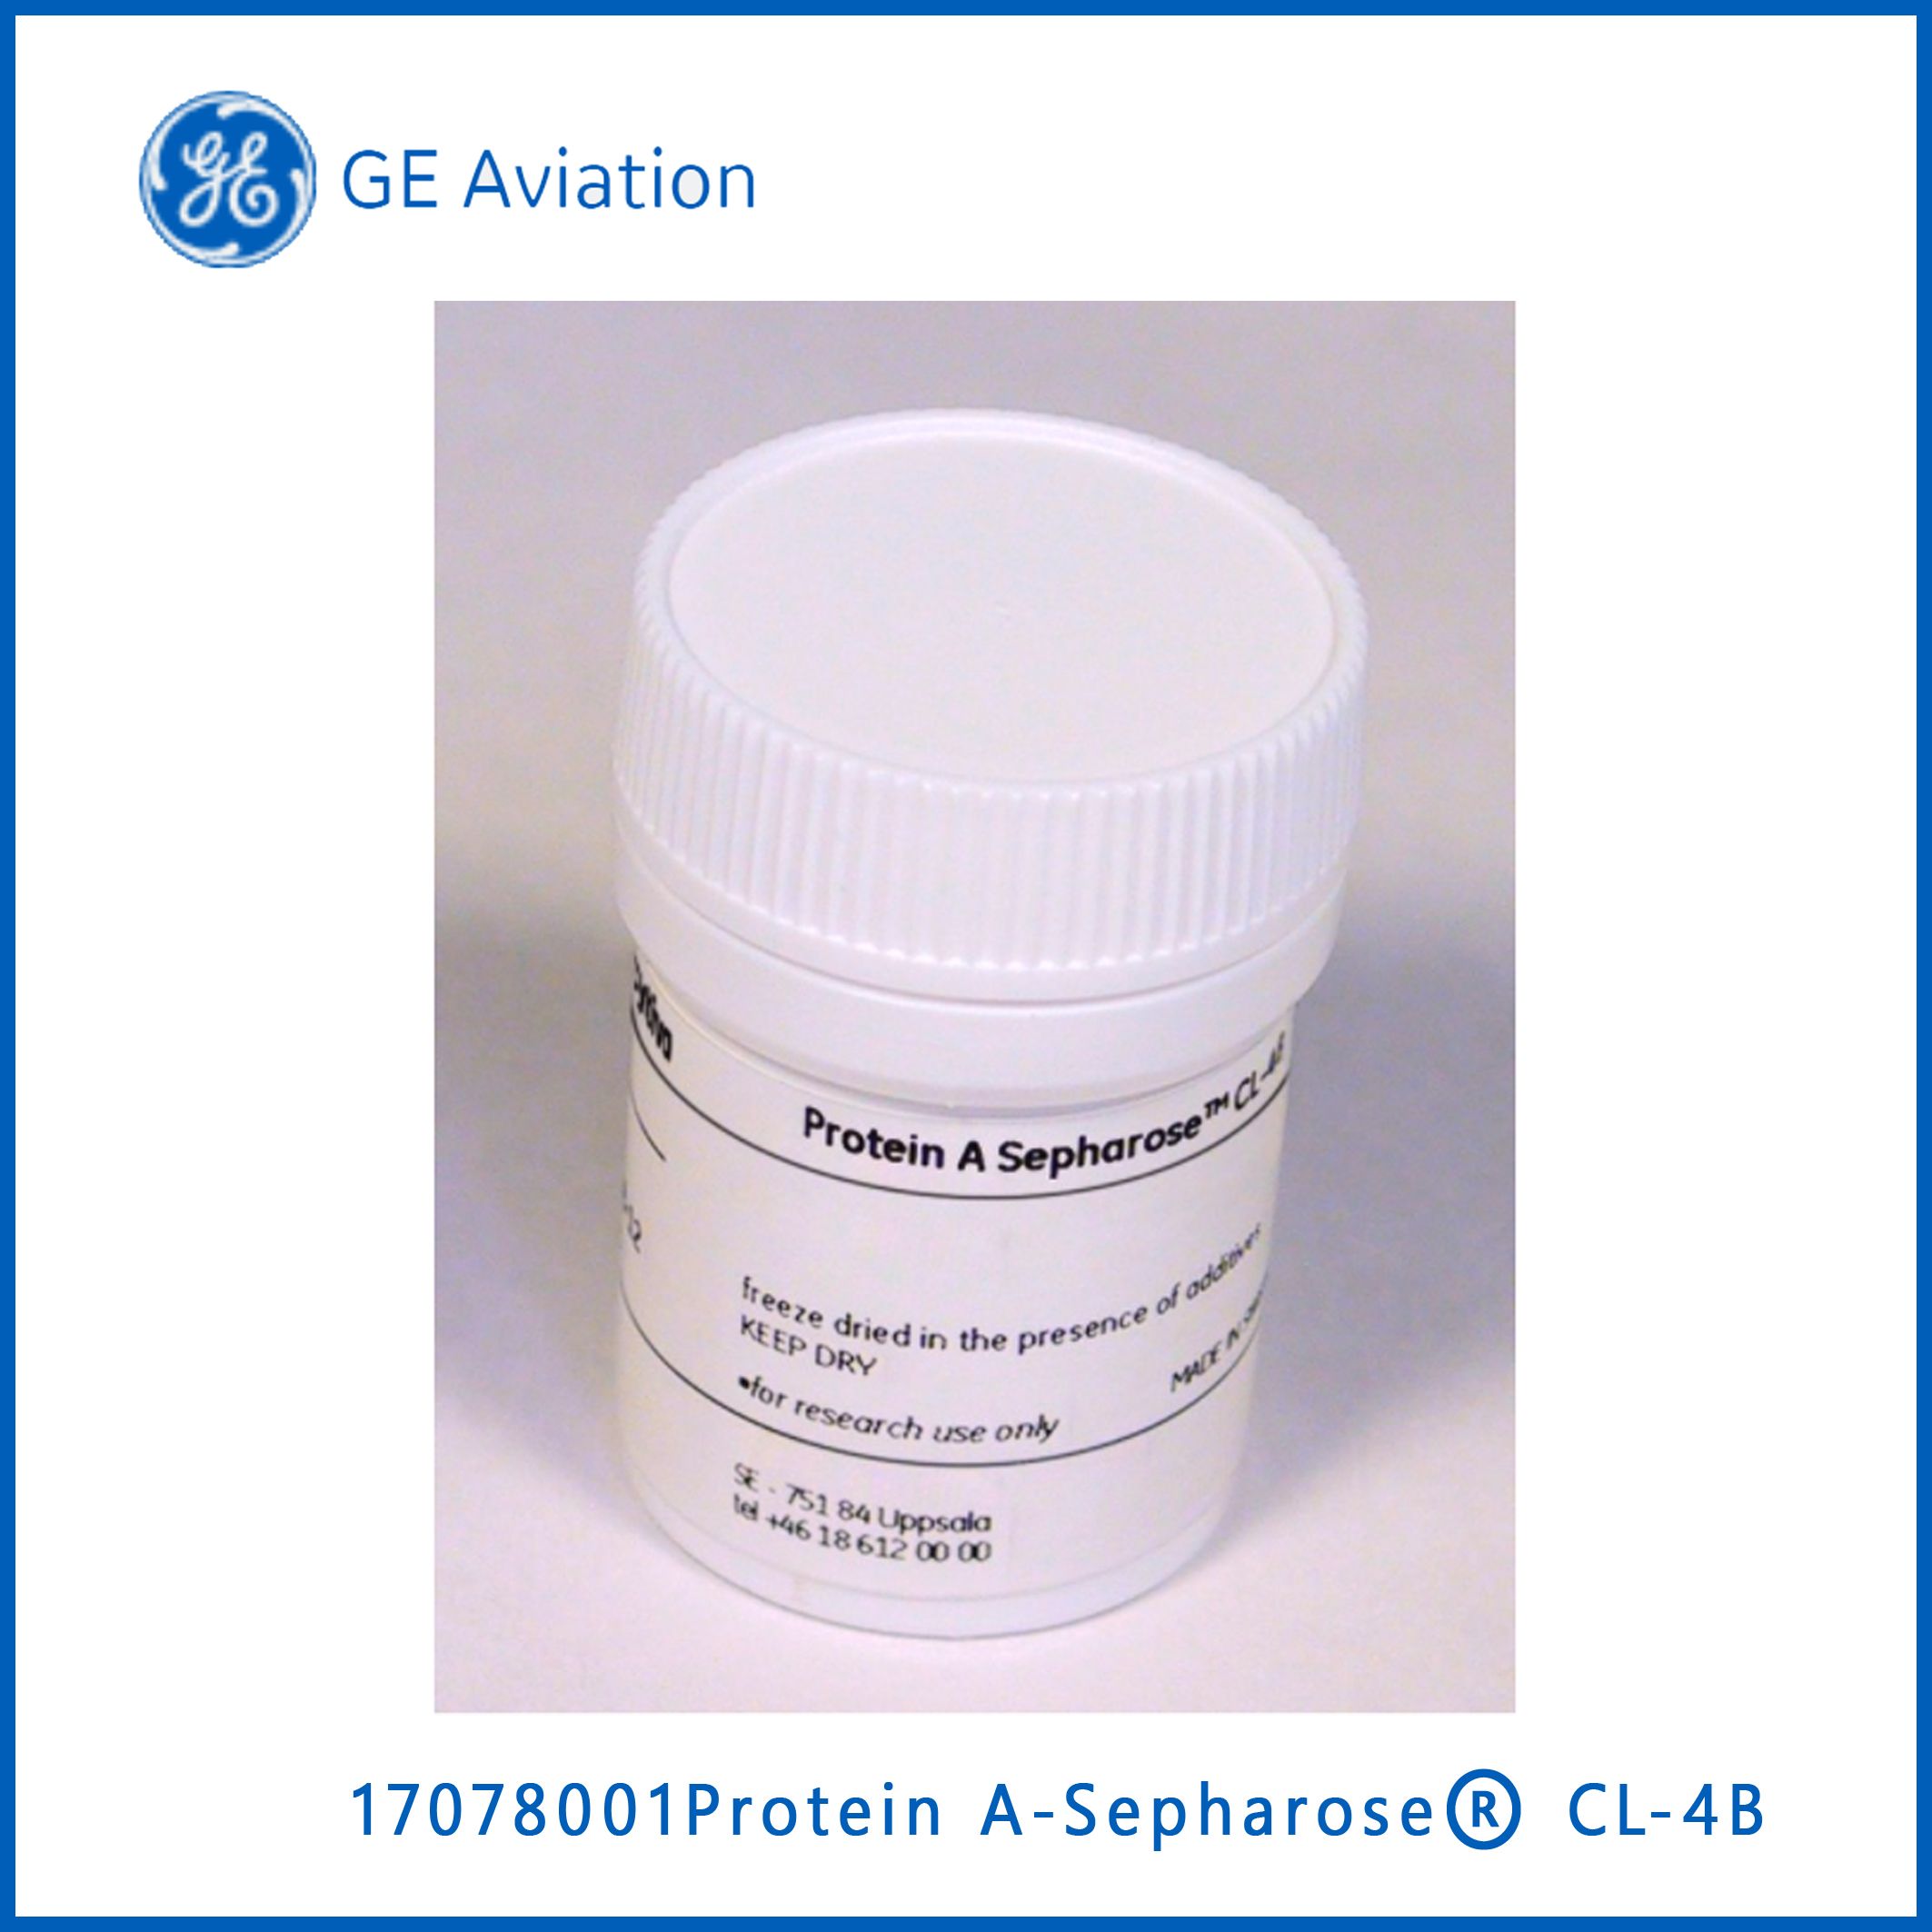 GE17078001Protein A-Sepharose® CL-4B, Protein A填料, 1.5g，现货